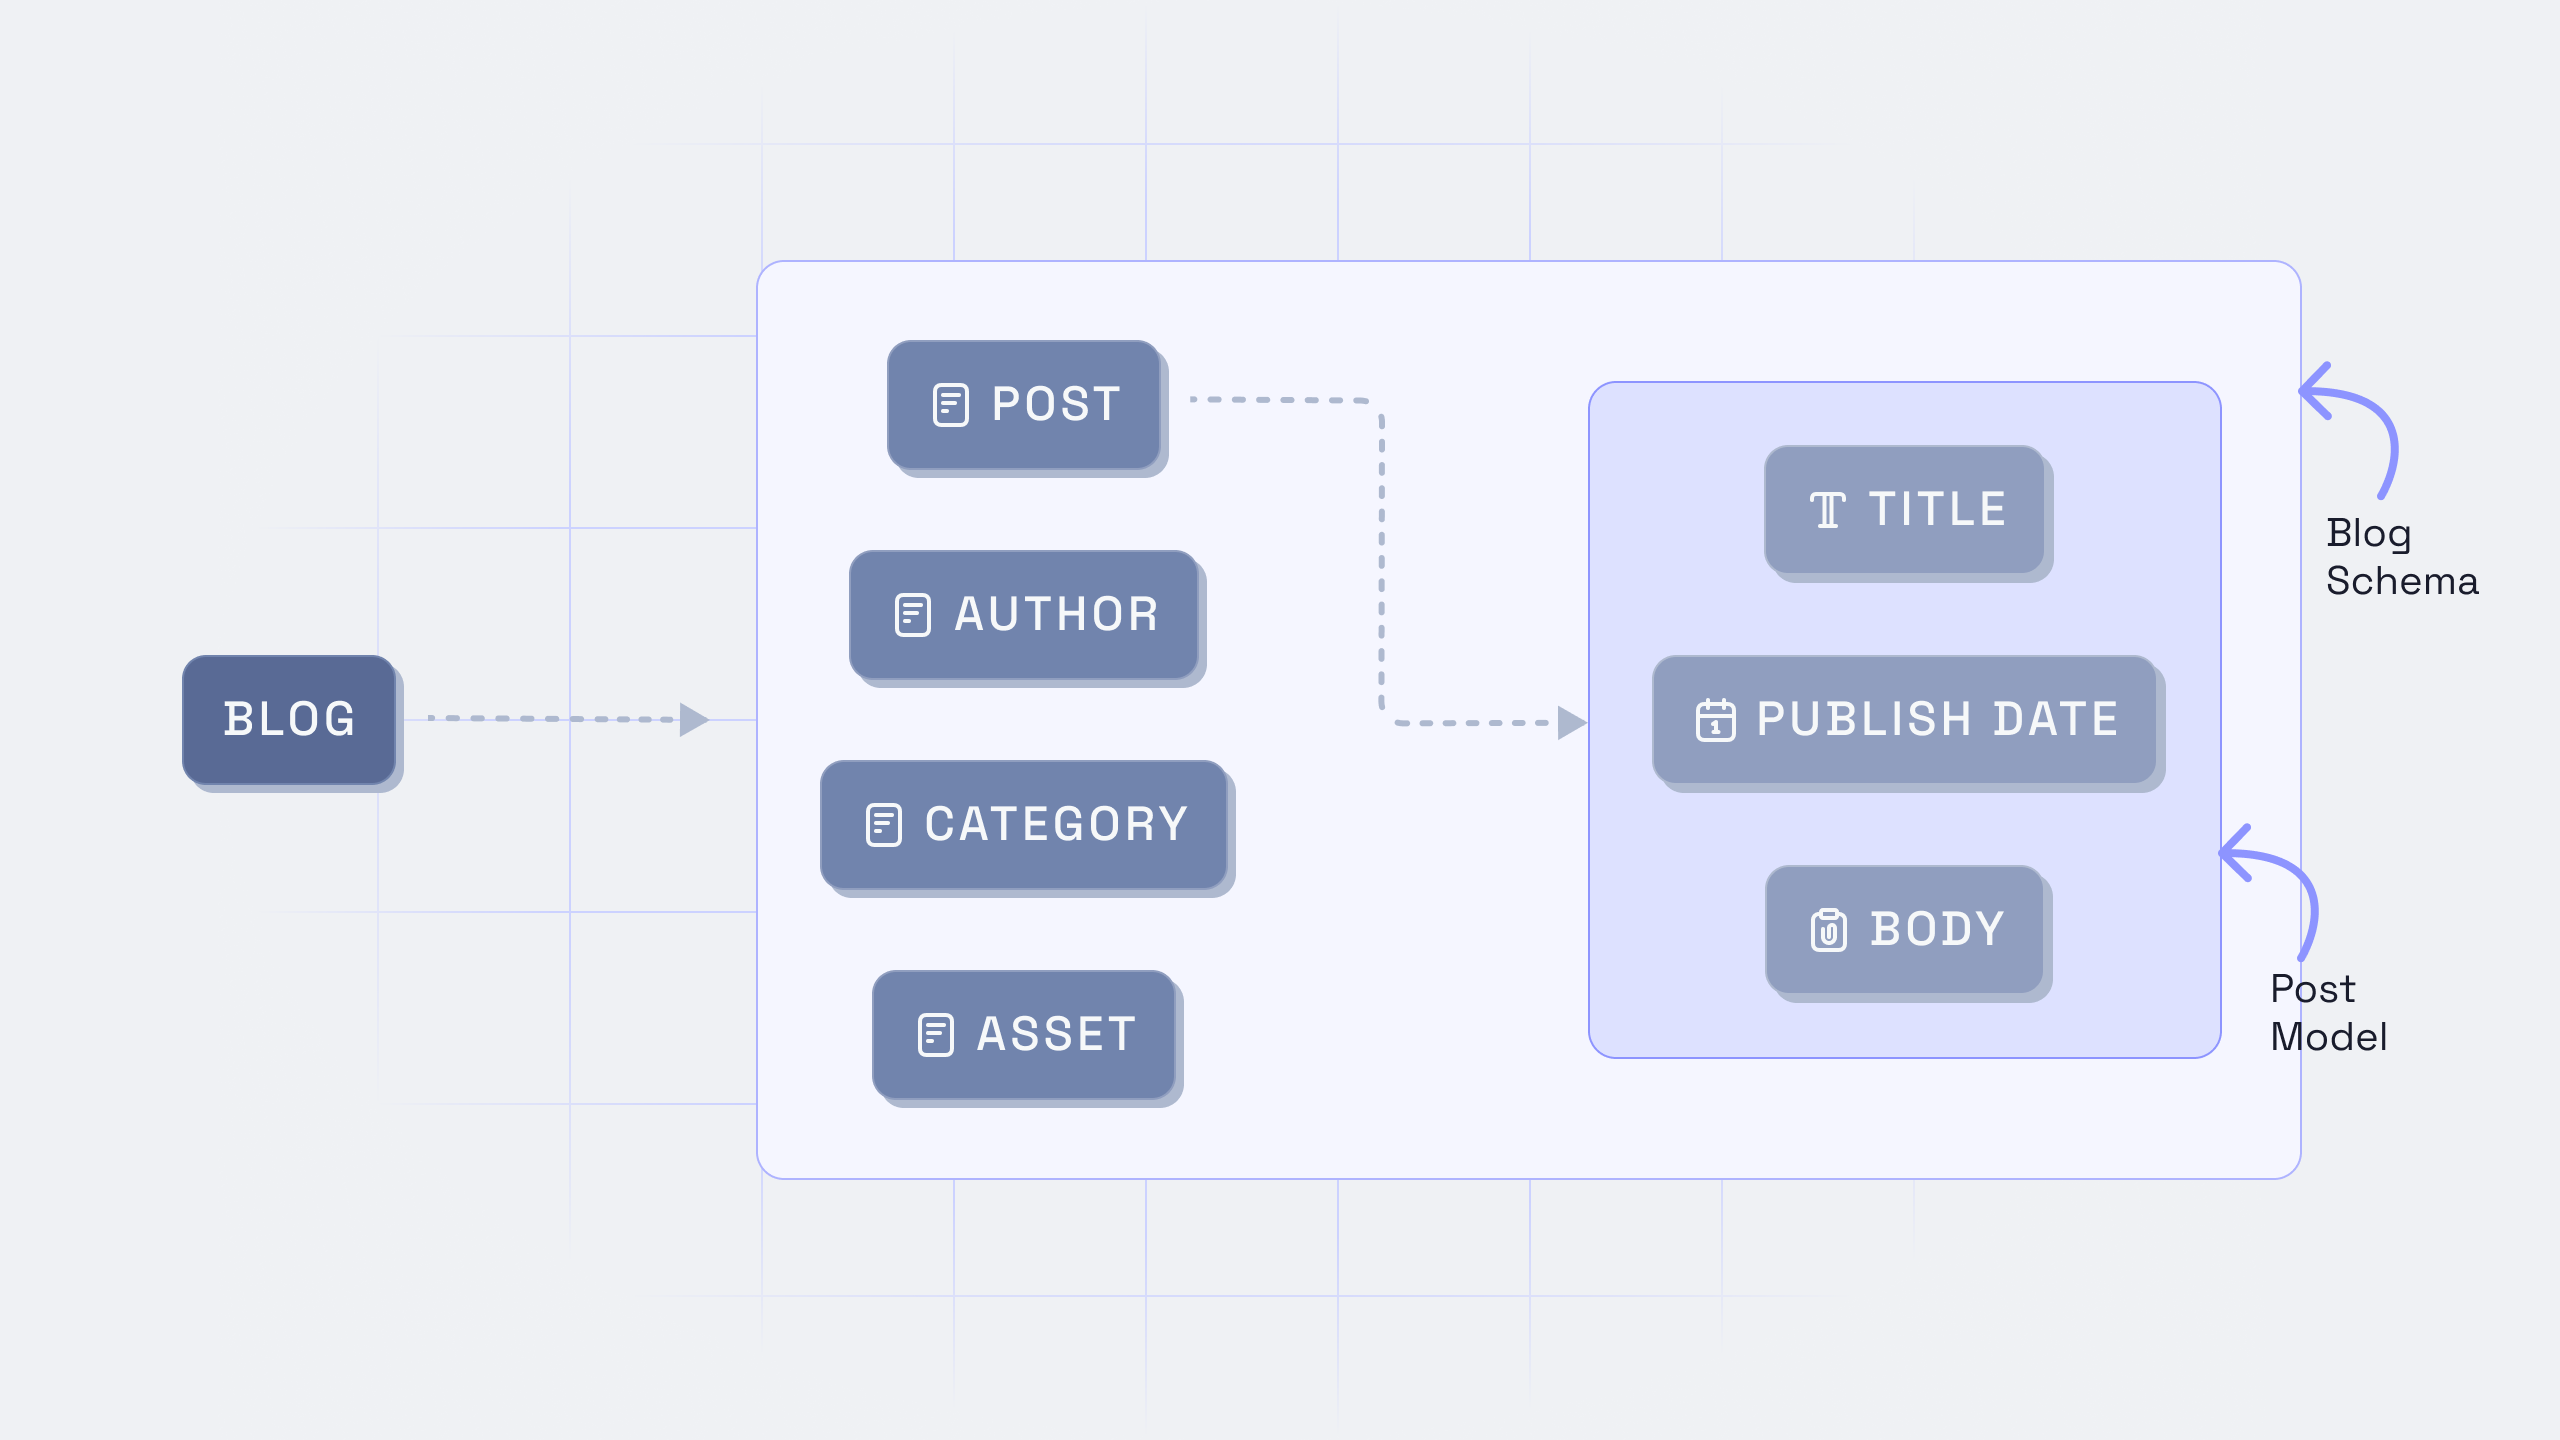 A blog schema being broken down into Posts, Authors, Categories, and Assets, and the post being broken down into Title, Published Date, and Author